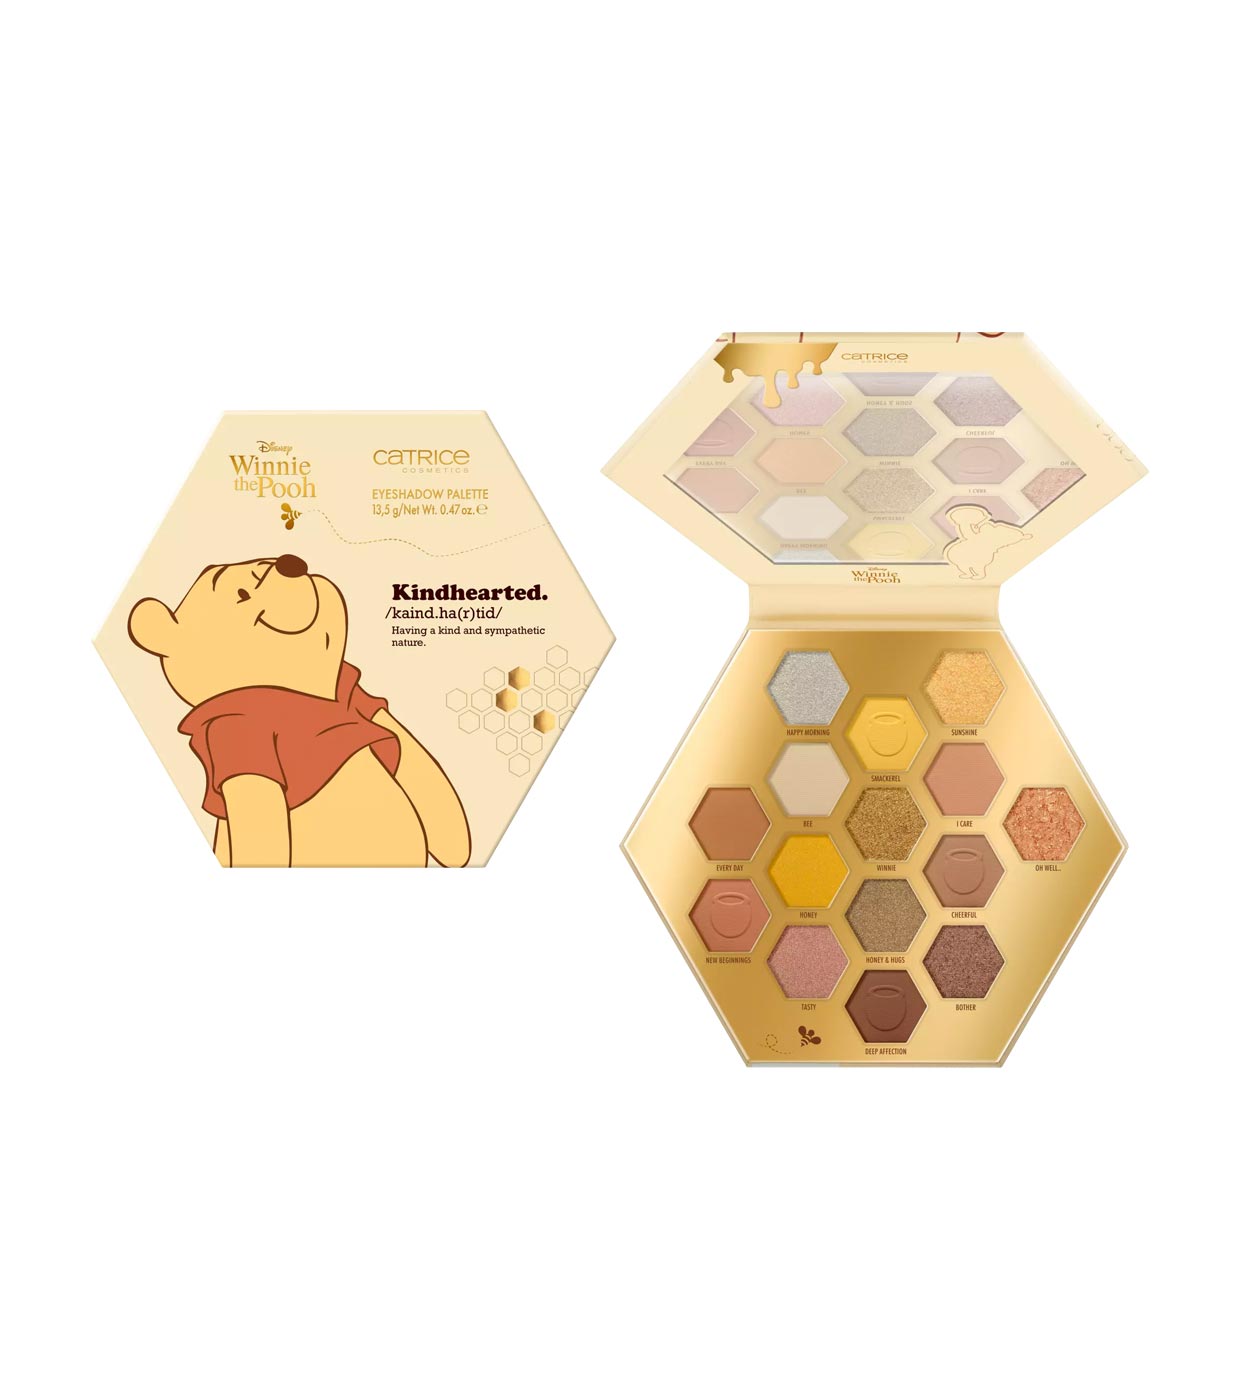 010: - Bee Can Sweet the - As - Pooh* Eyeshadow Palette Buy Catrice *Winnie | Maquillalia